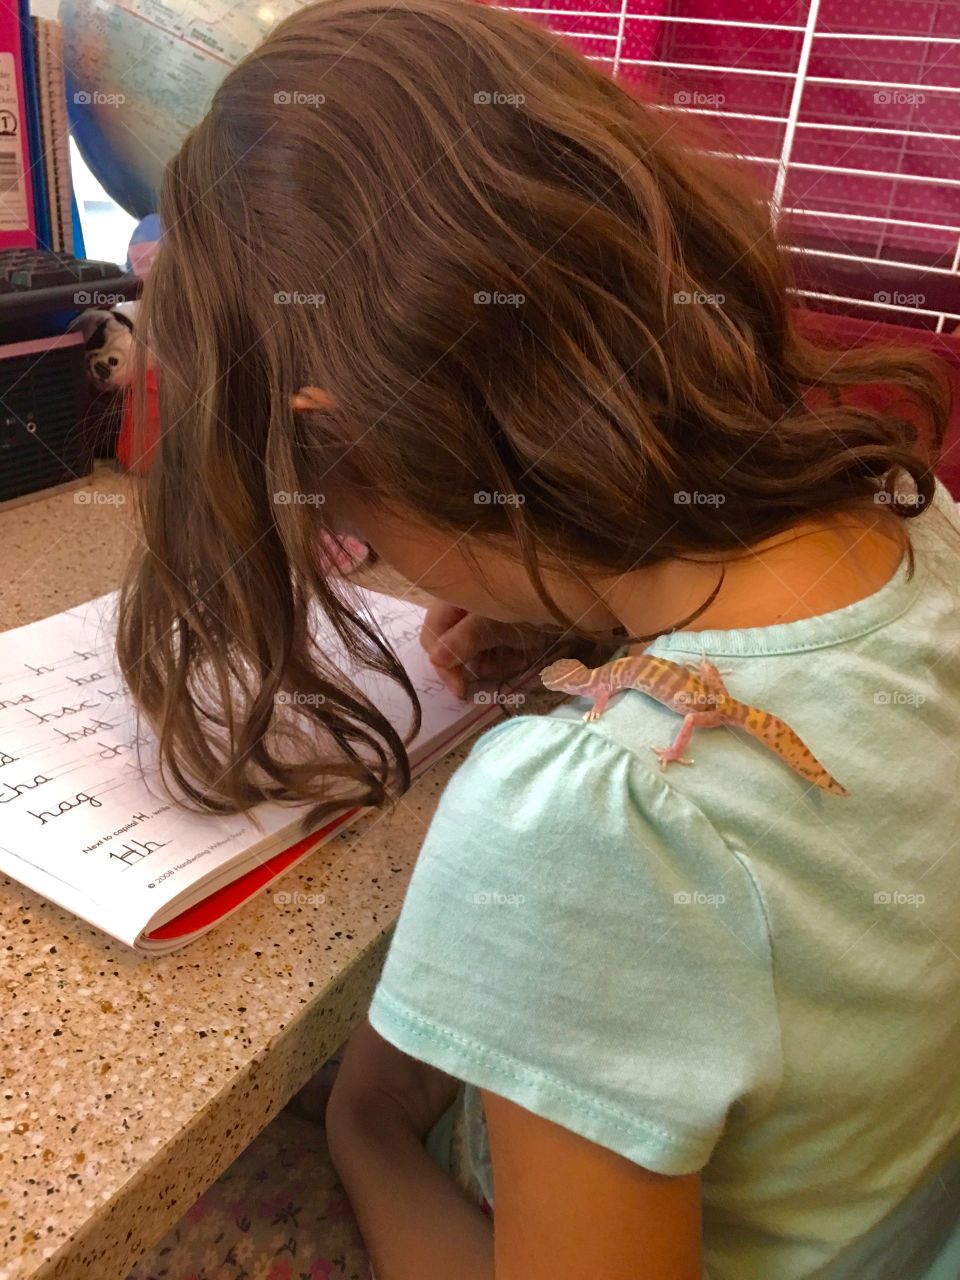 Western banded gecko sitting on little girls' shoulder, while she practices cursive writing